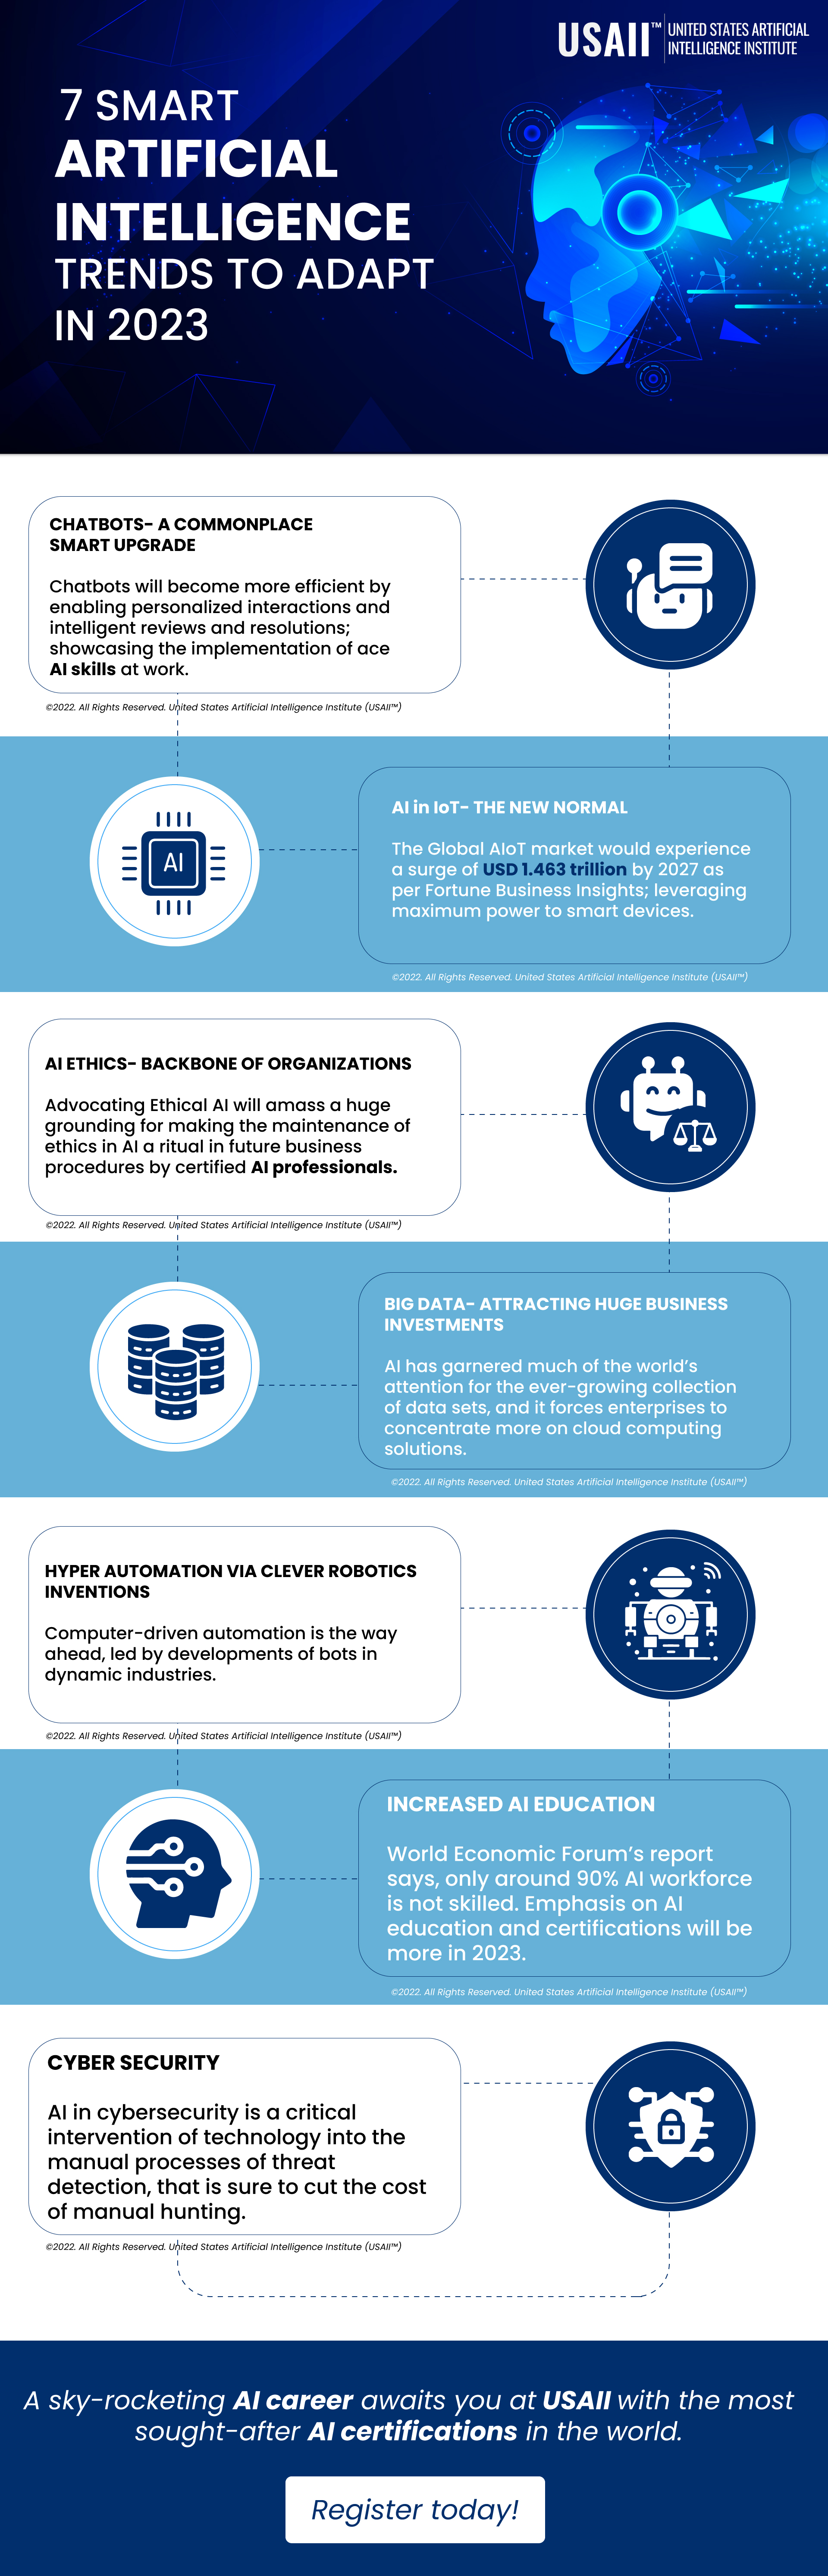 7-smart-artificial-intelligence-trends-to-adapt-in-2023-Infographic